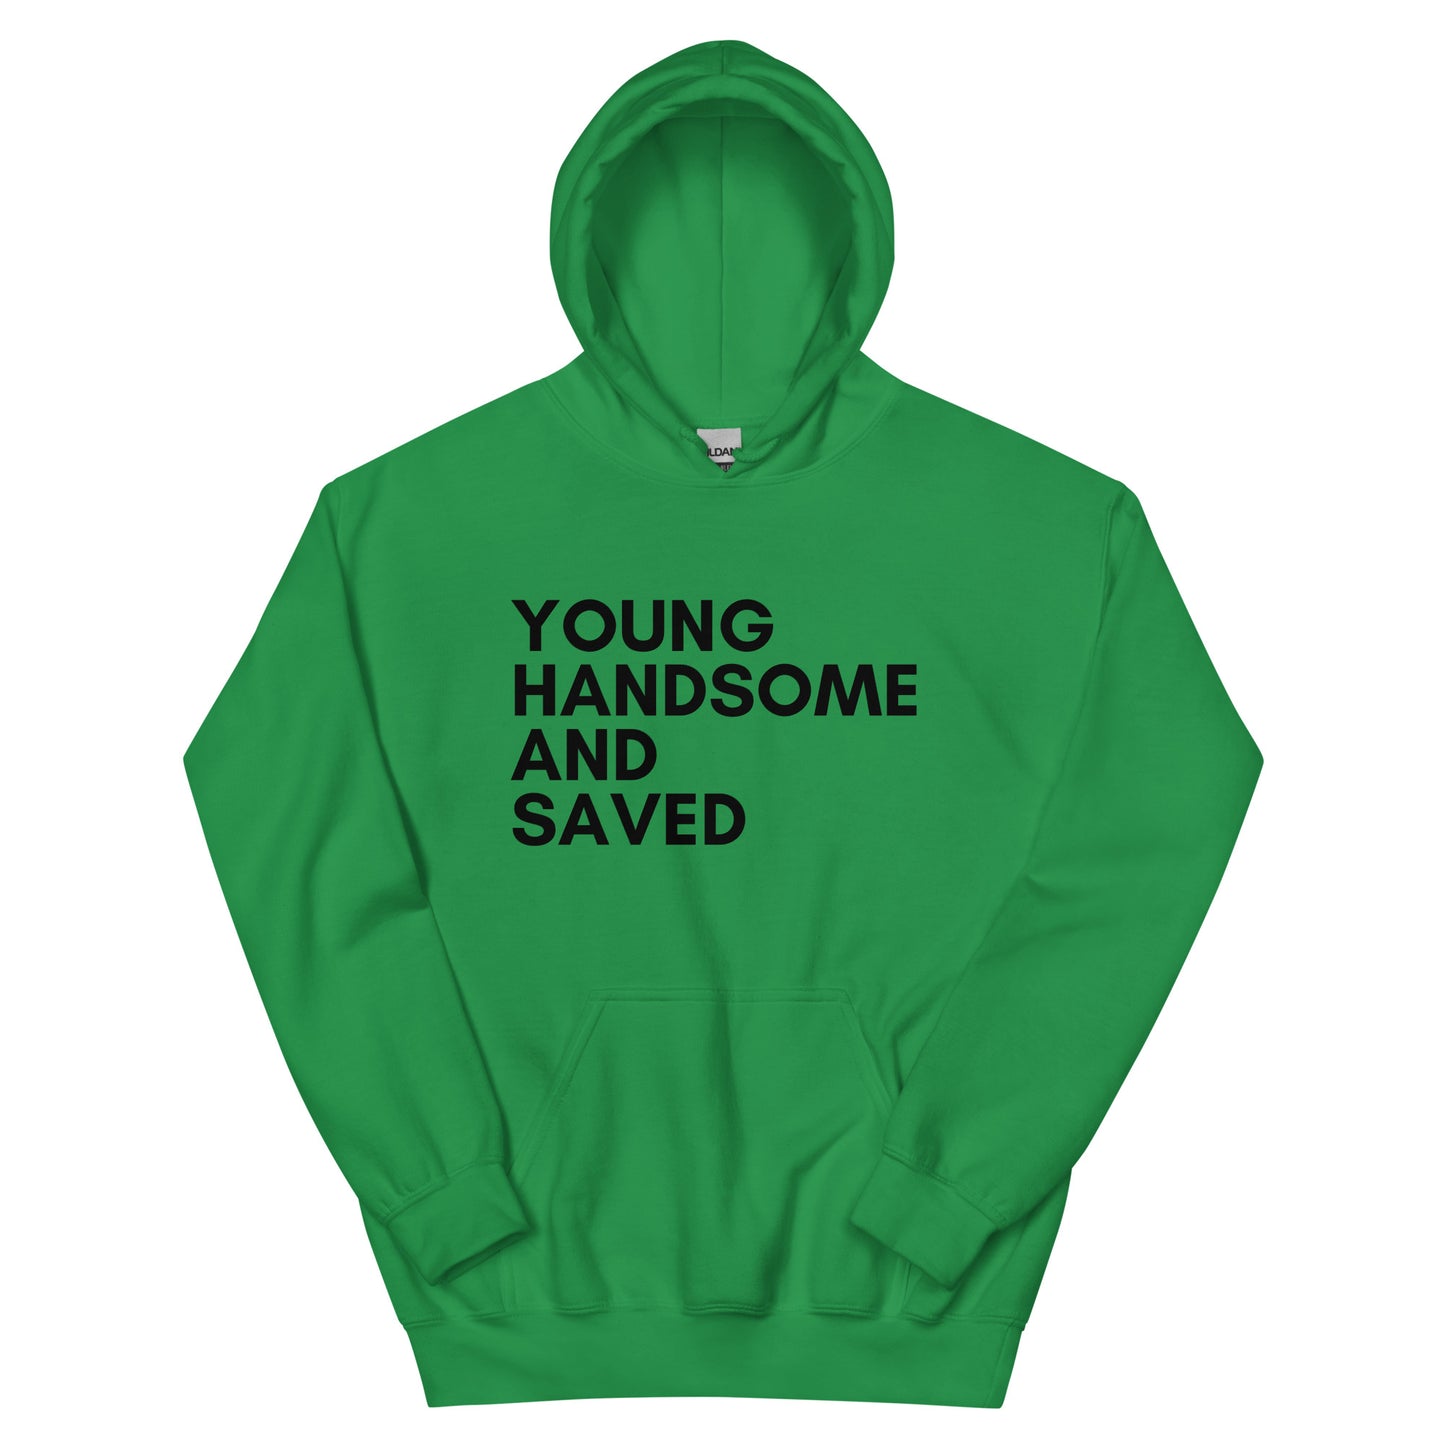 "Young Handsome & Saved" Hoodie